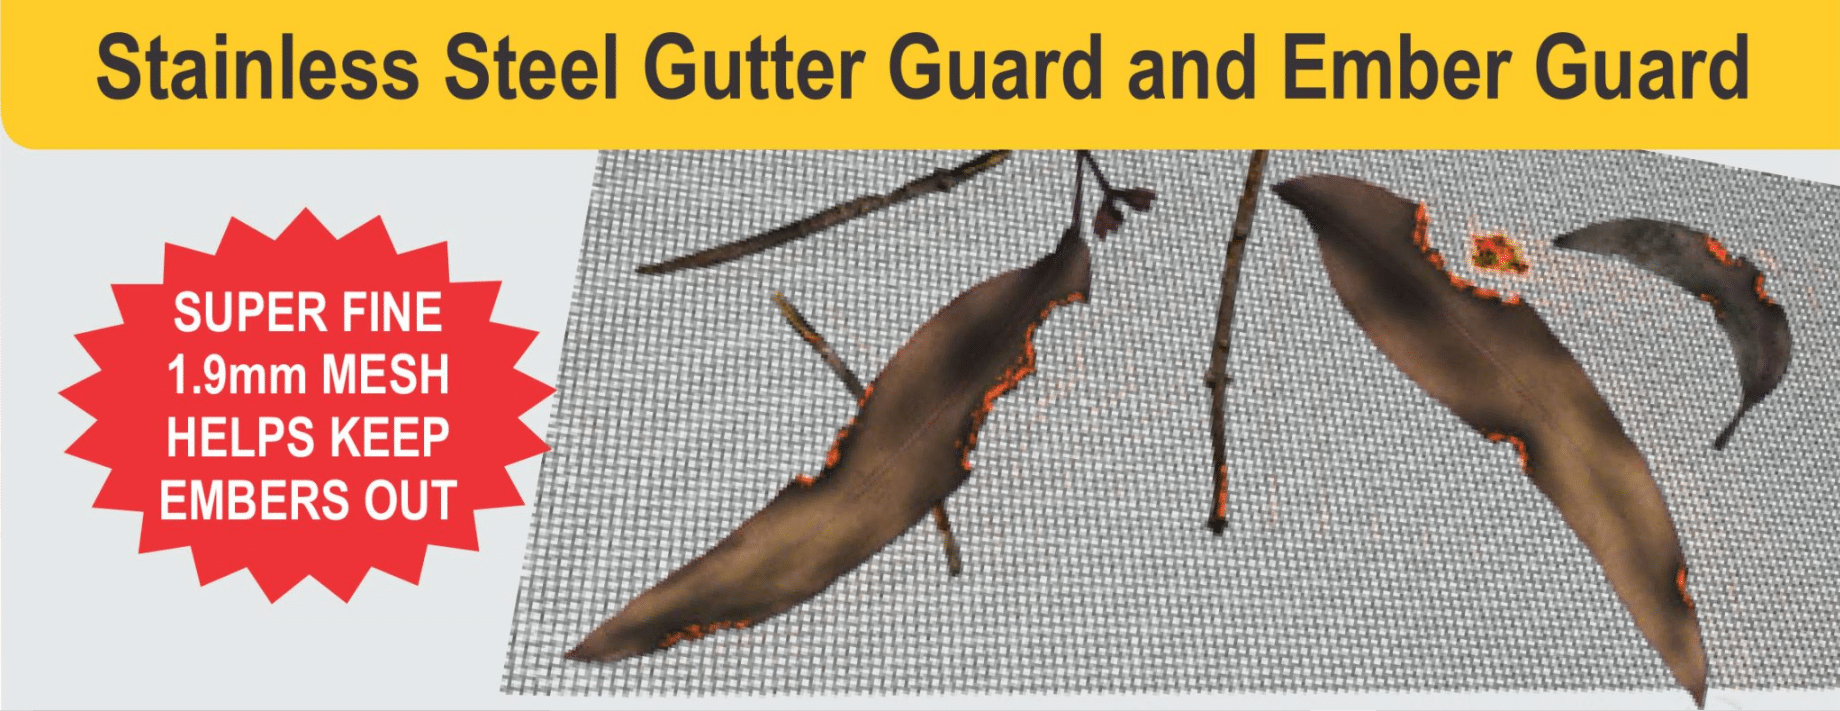 Stainless Steel Gutter Guard and ember guard